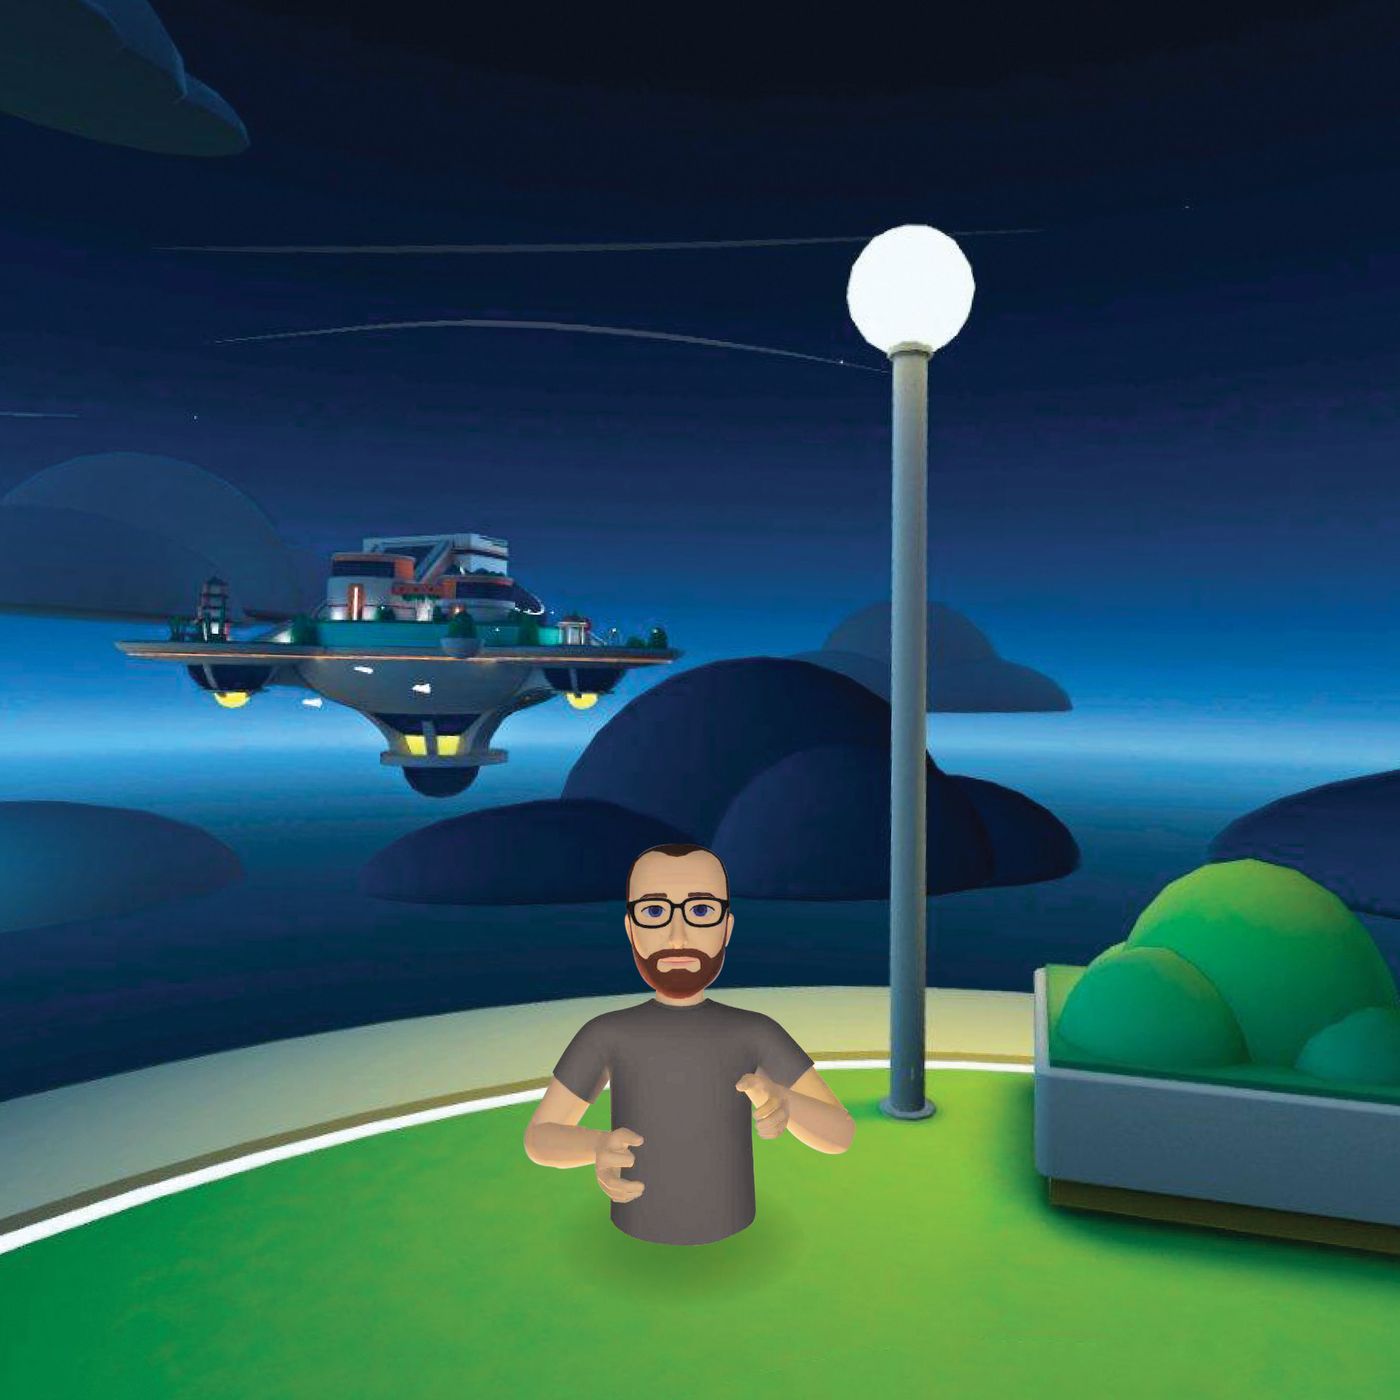 Searching for Friends in Mark Zuckerbergs Metaverse